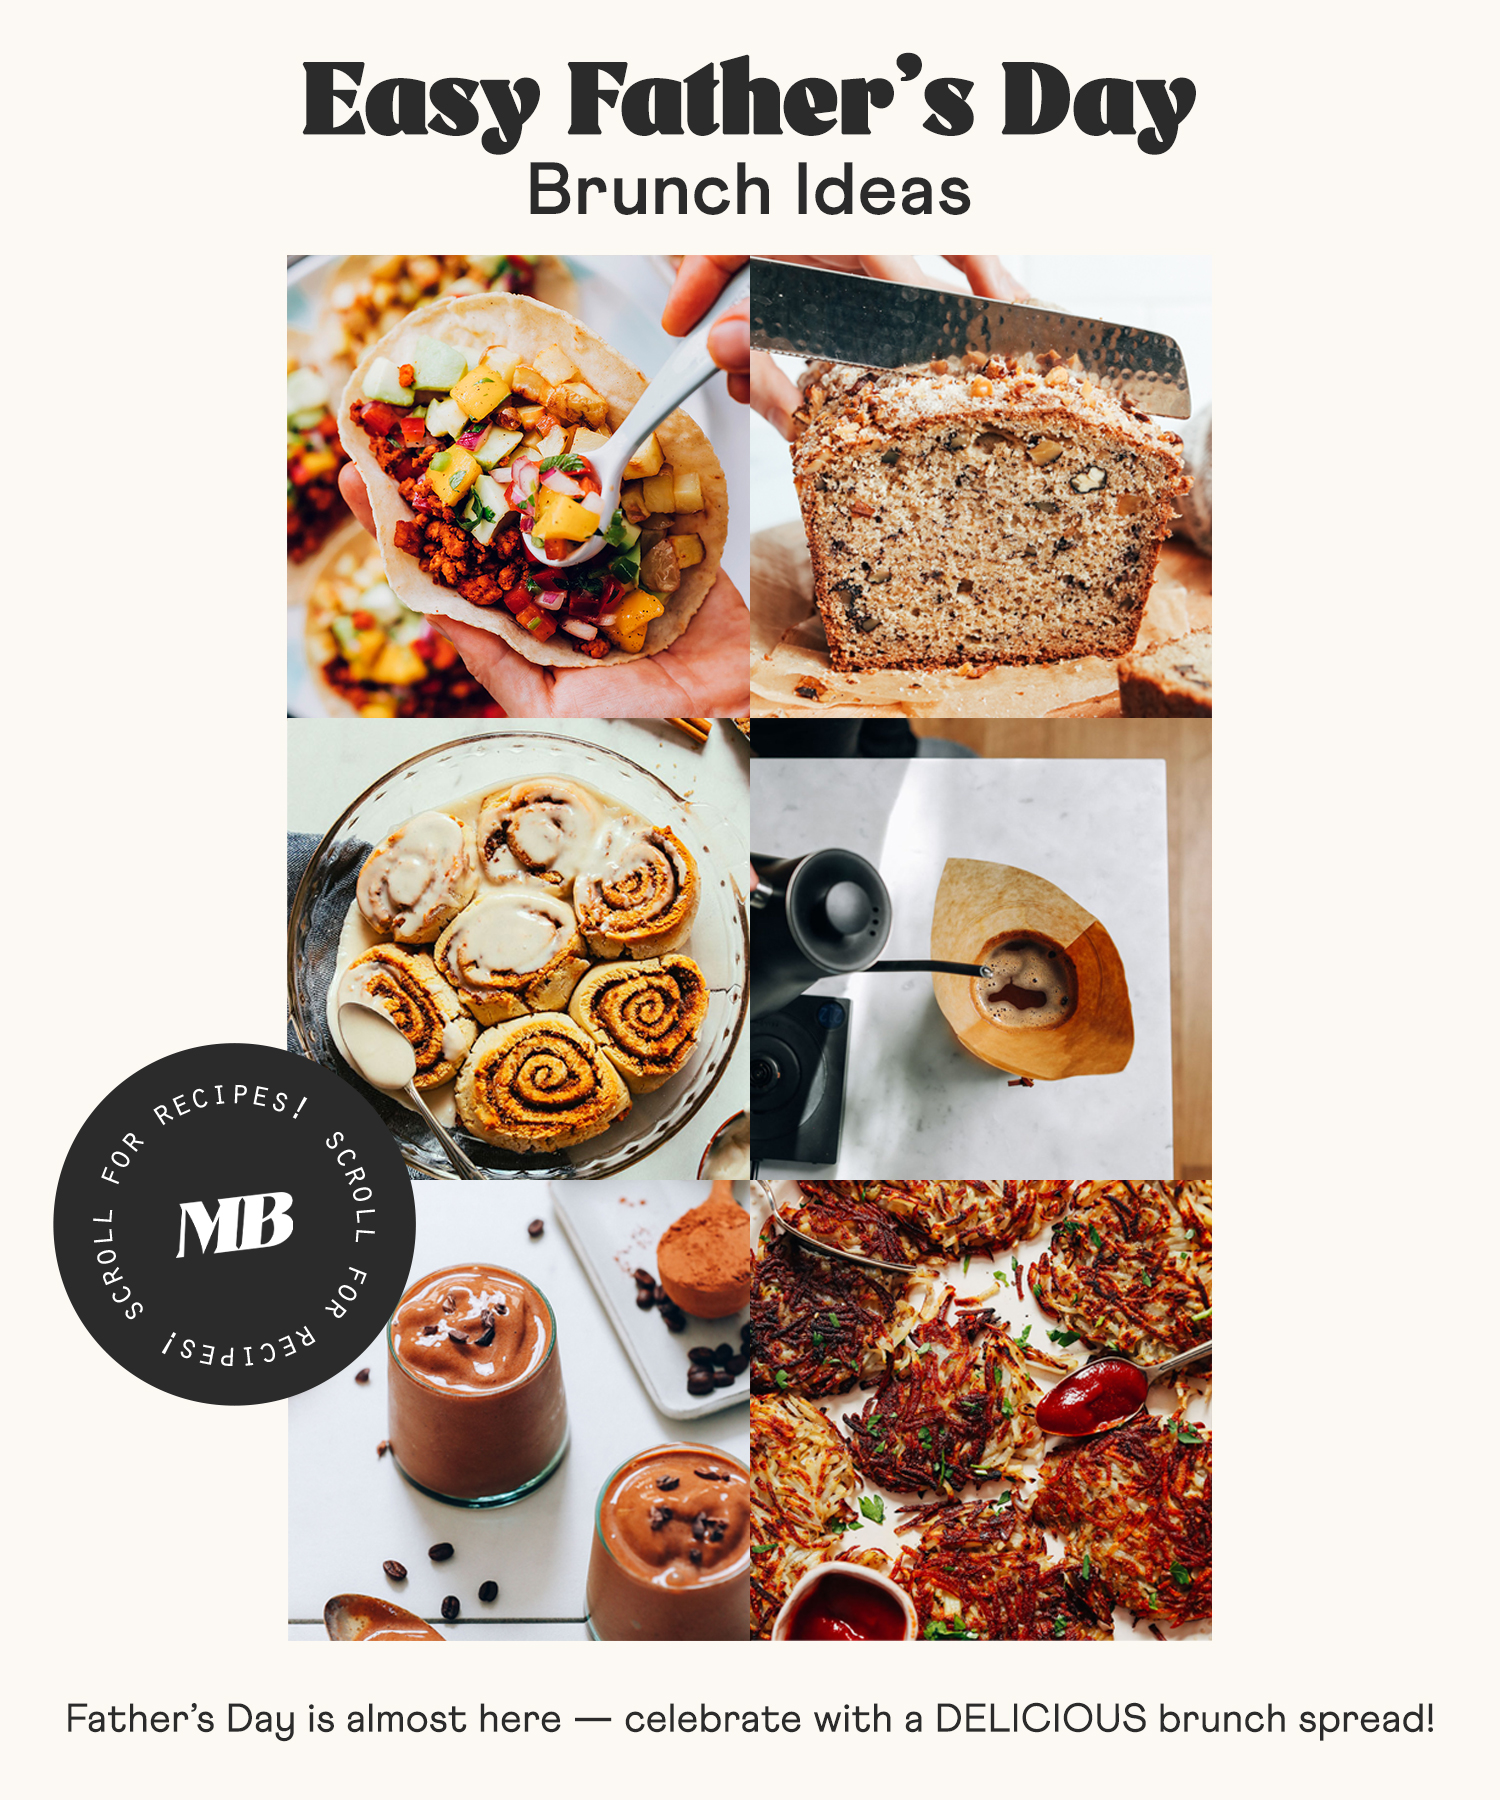 Image of easy father's day brunch ideas